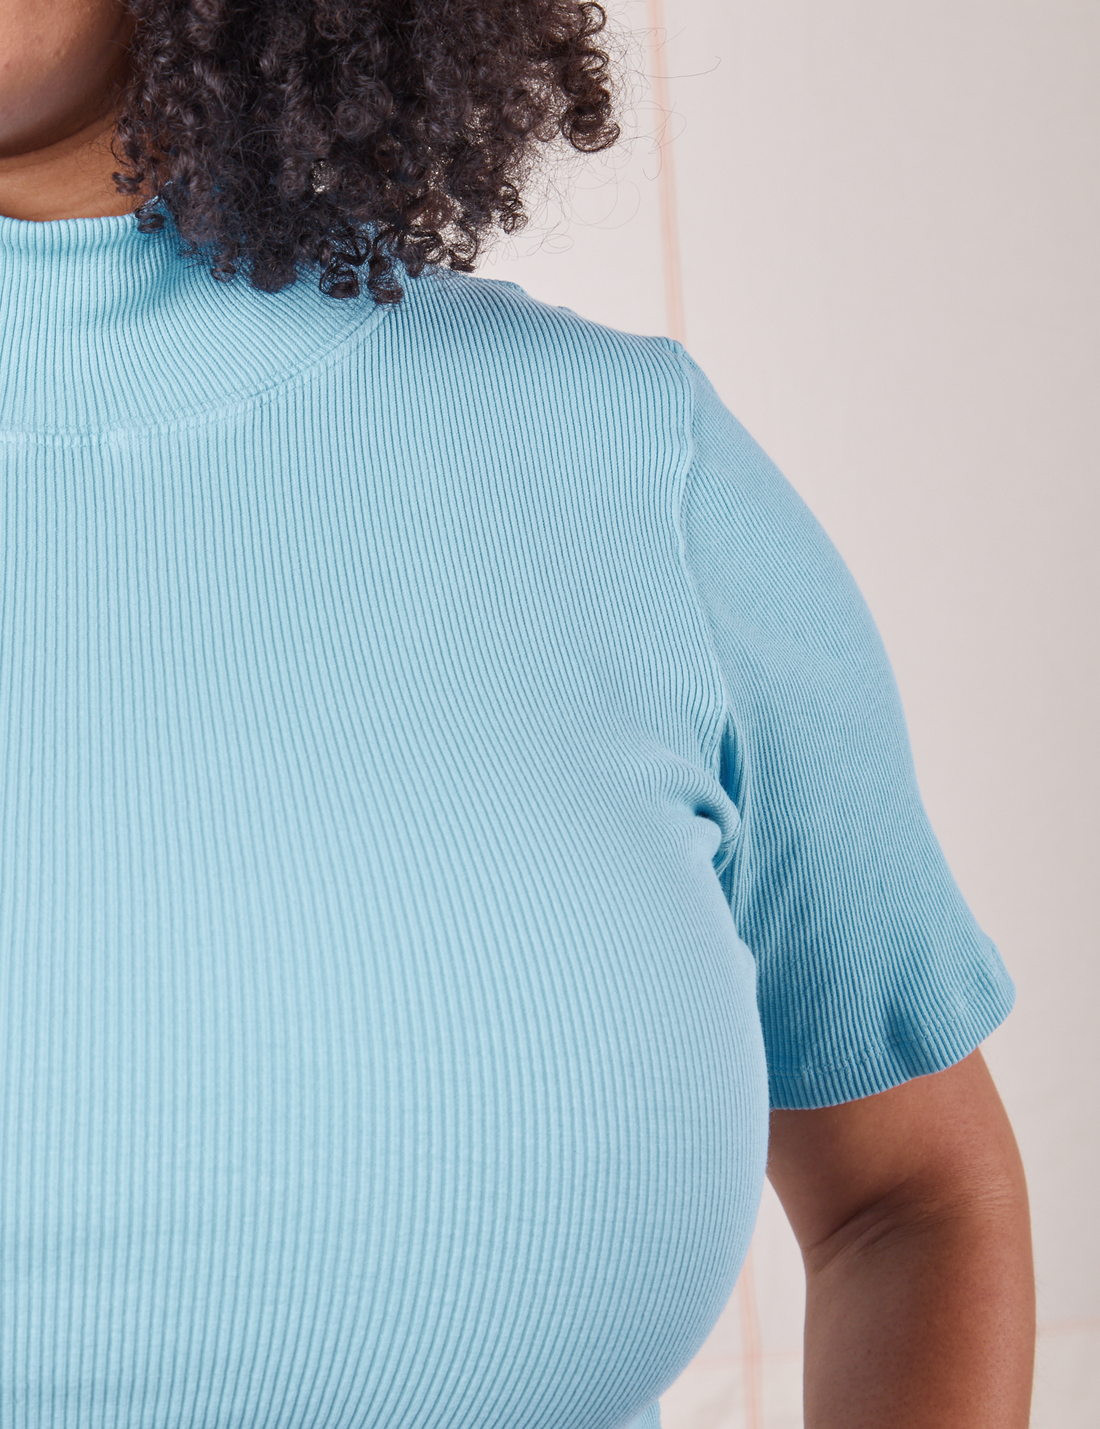 1/2 Sleeve Essential Turtleneck in Baby Blue front close up on Lana